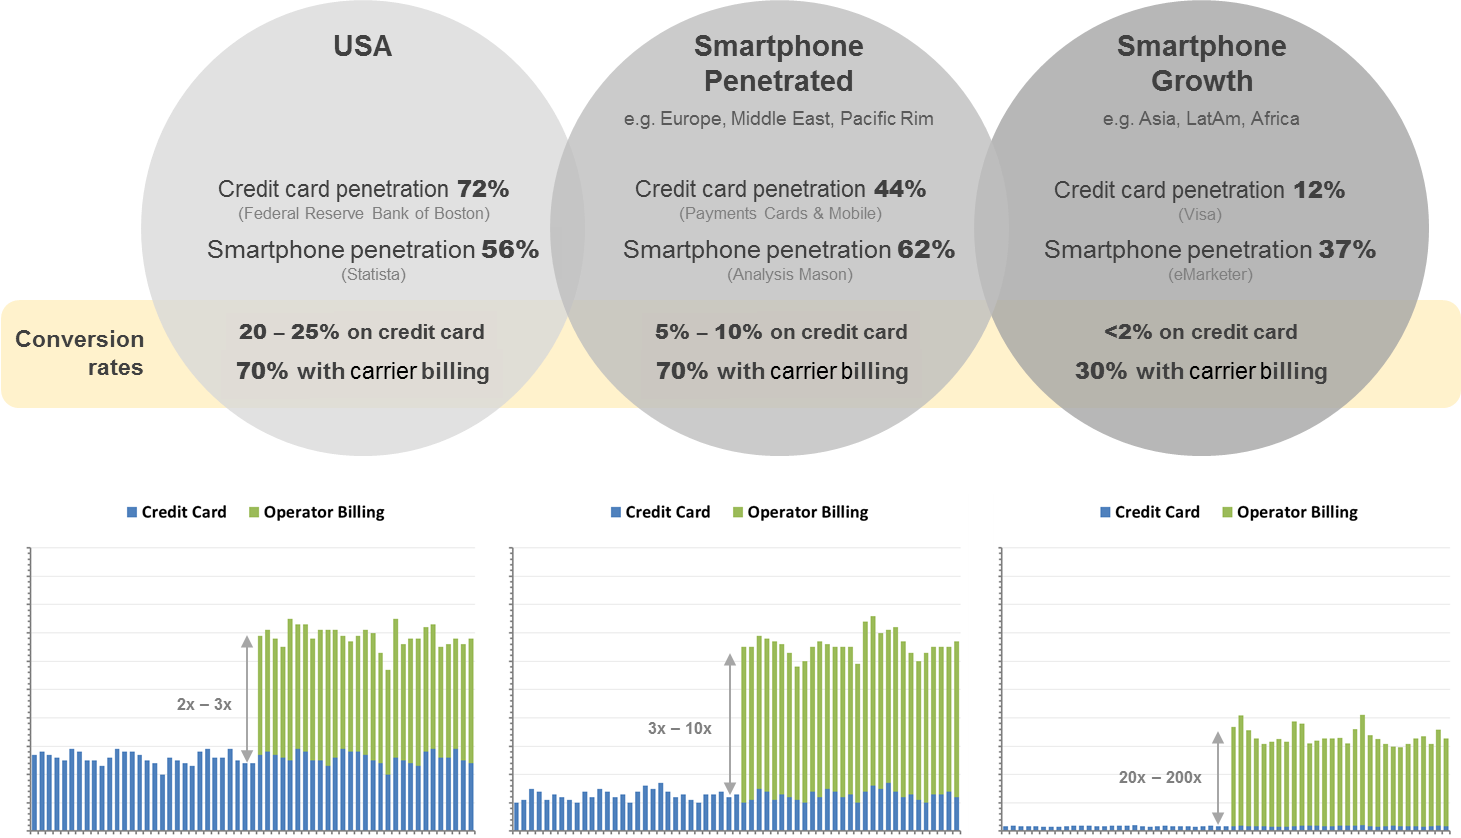 Fig 2: Mobile markets and conversion rates